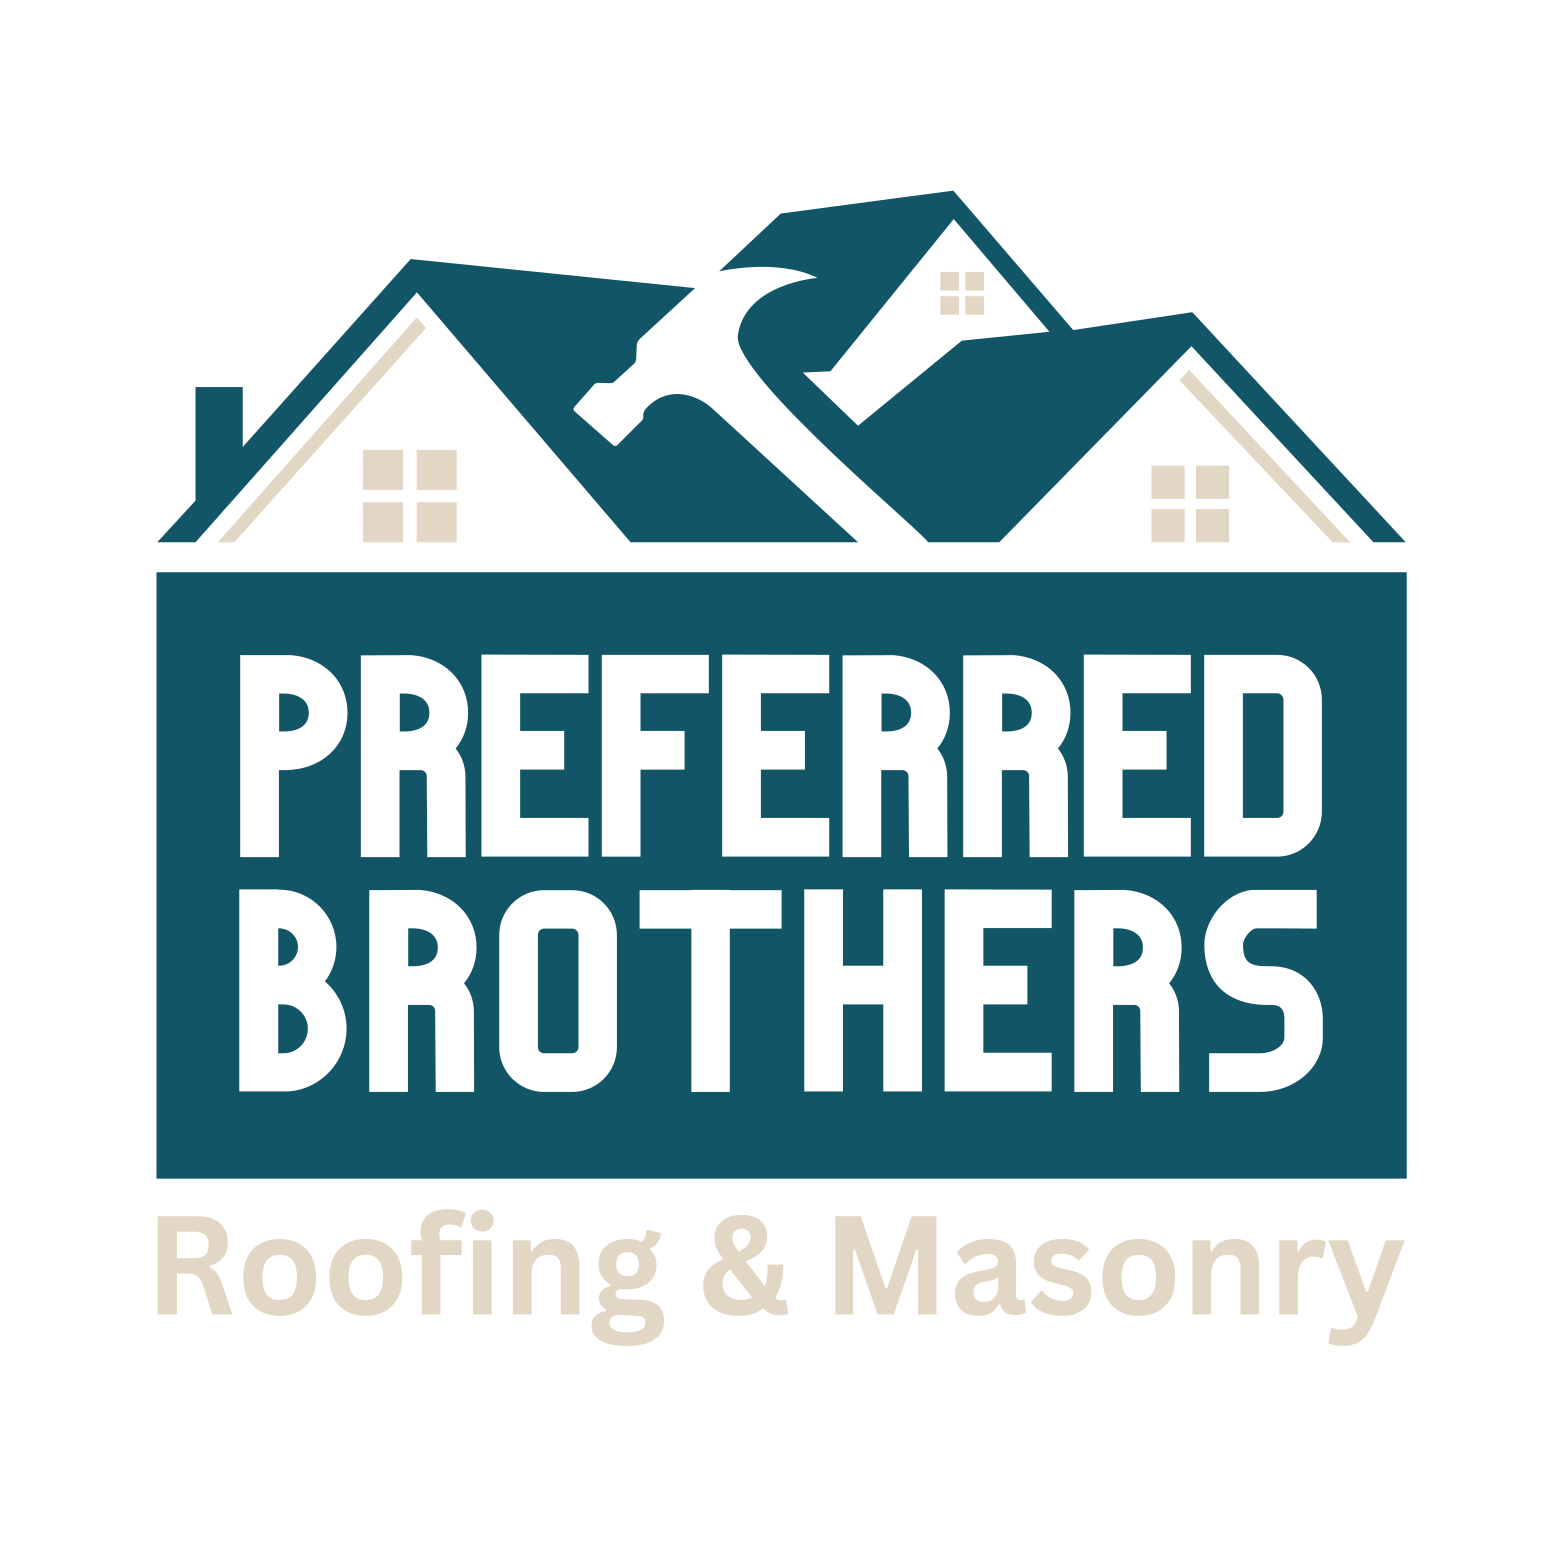 Top Roofers in Roseville | Preferred Brothers